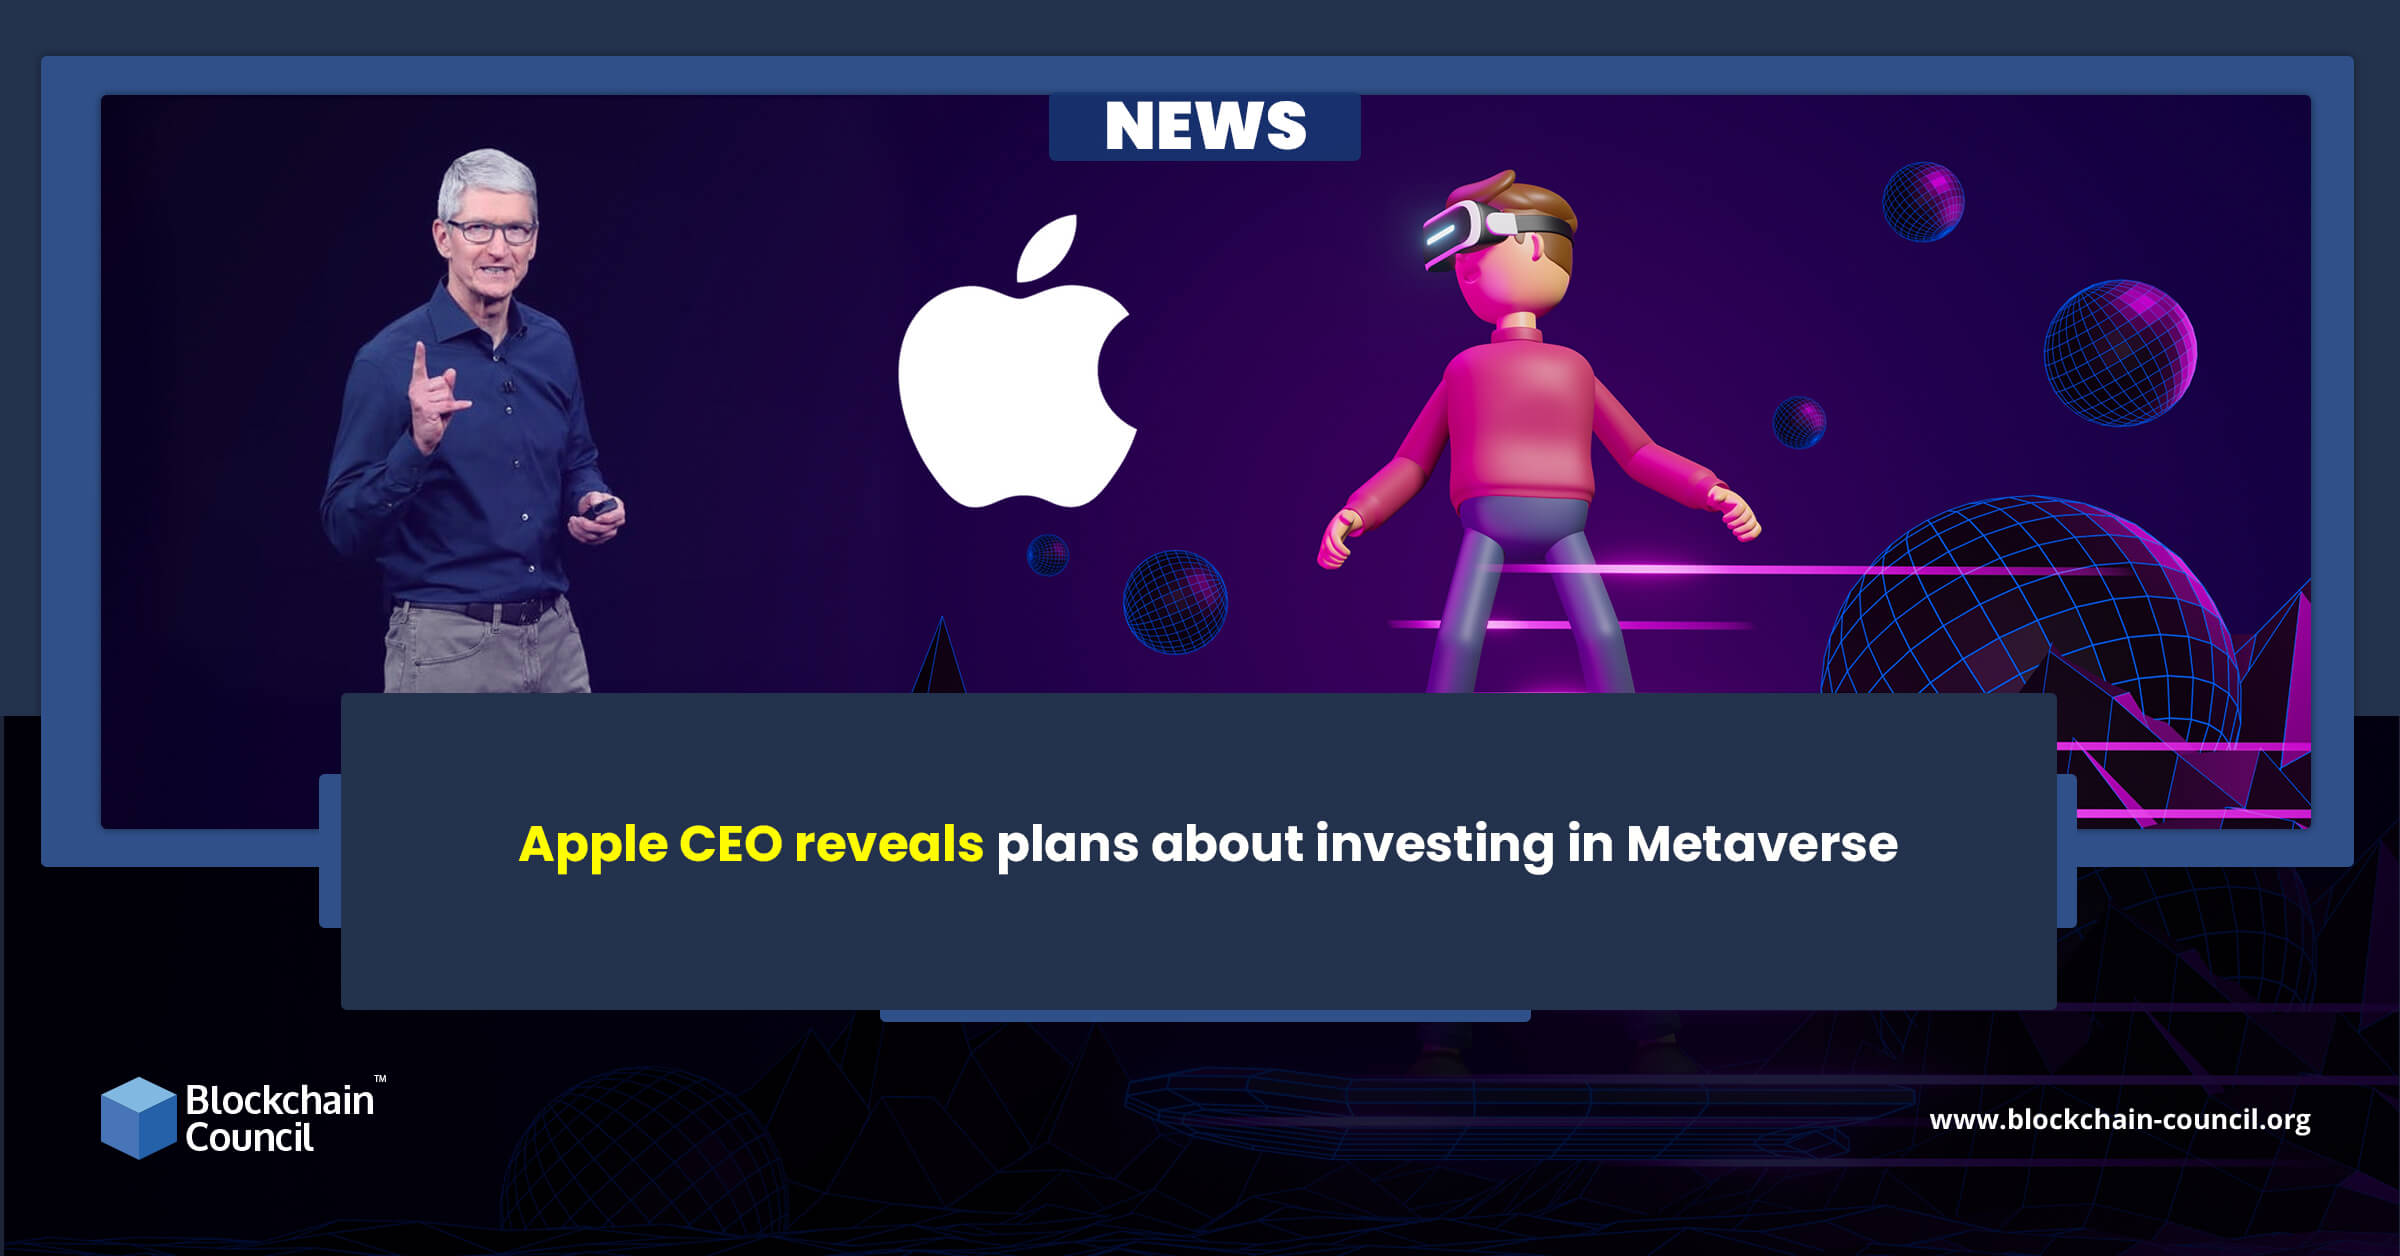 Apple CEO reveals plans about investing in Metaverse